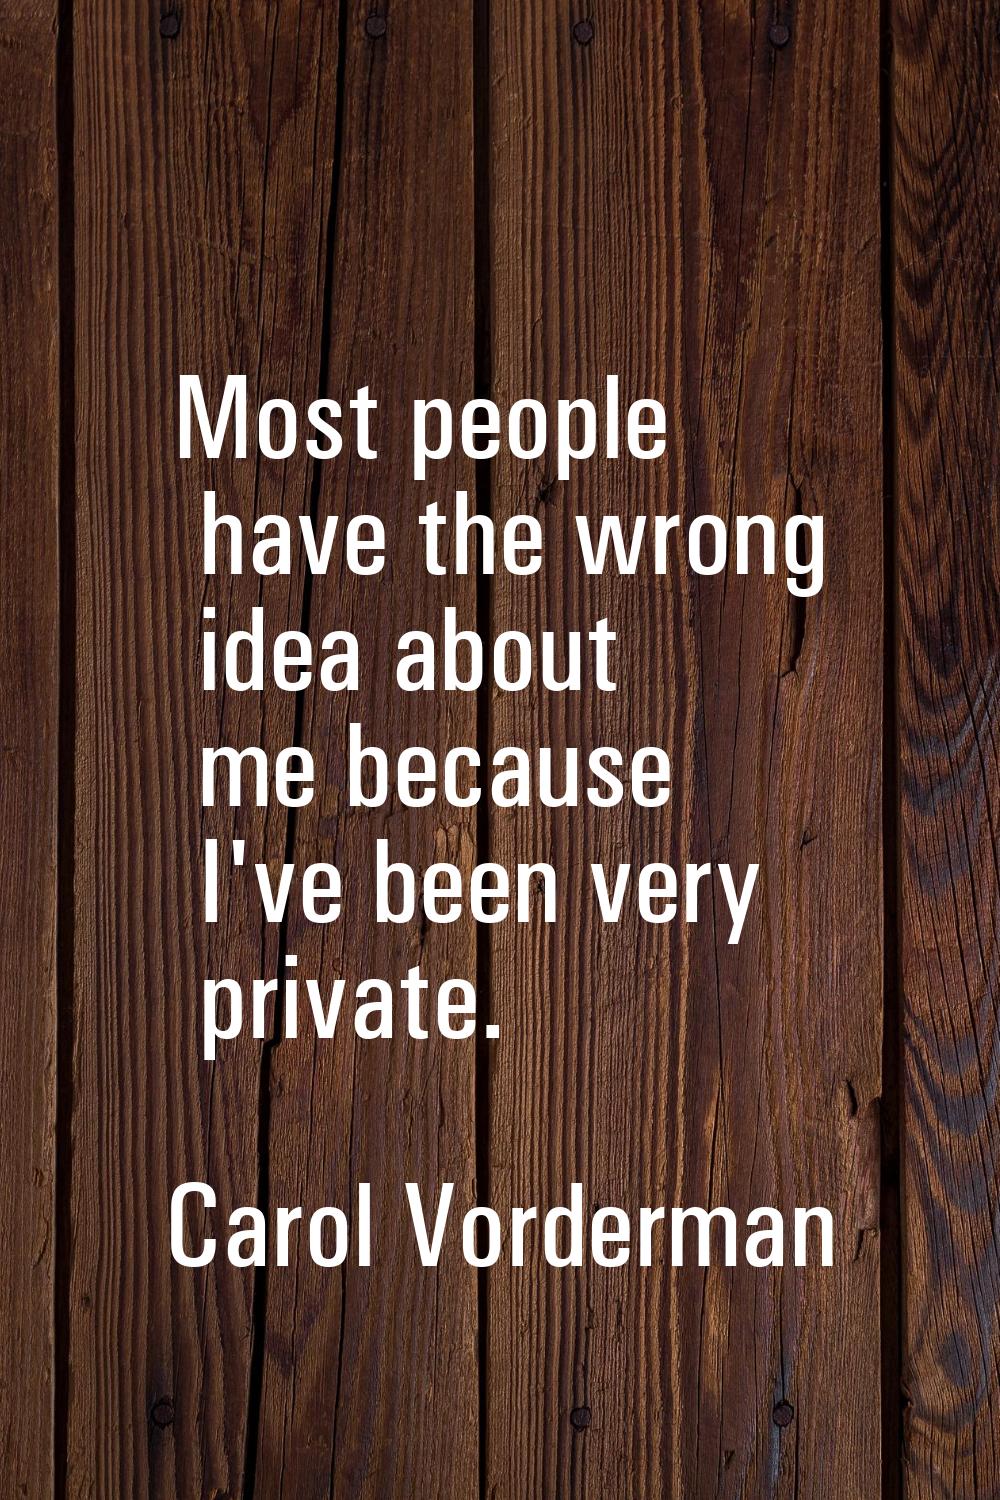 Most people have the wrong idea about me because I've been very private.